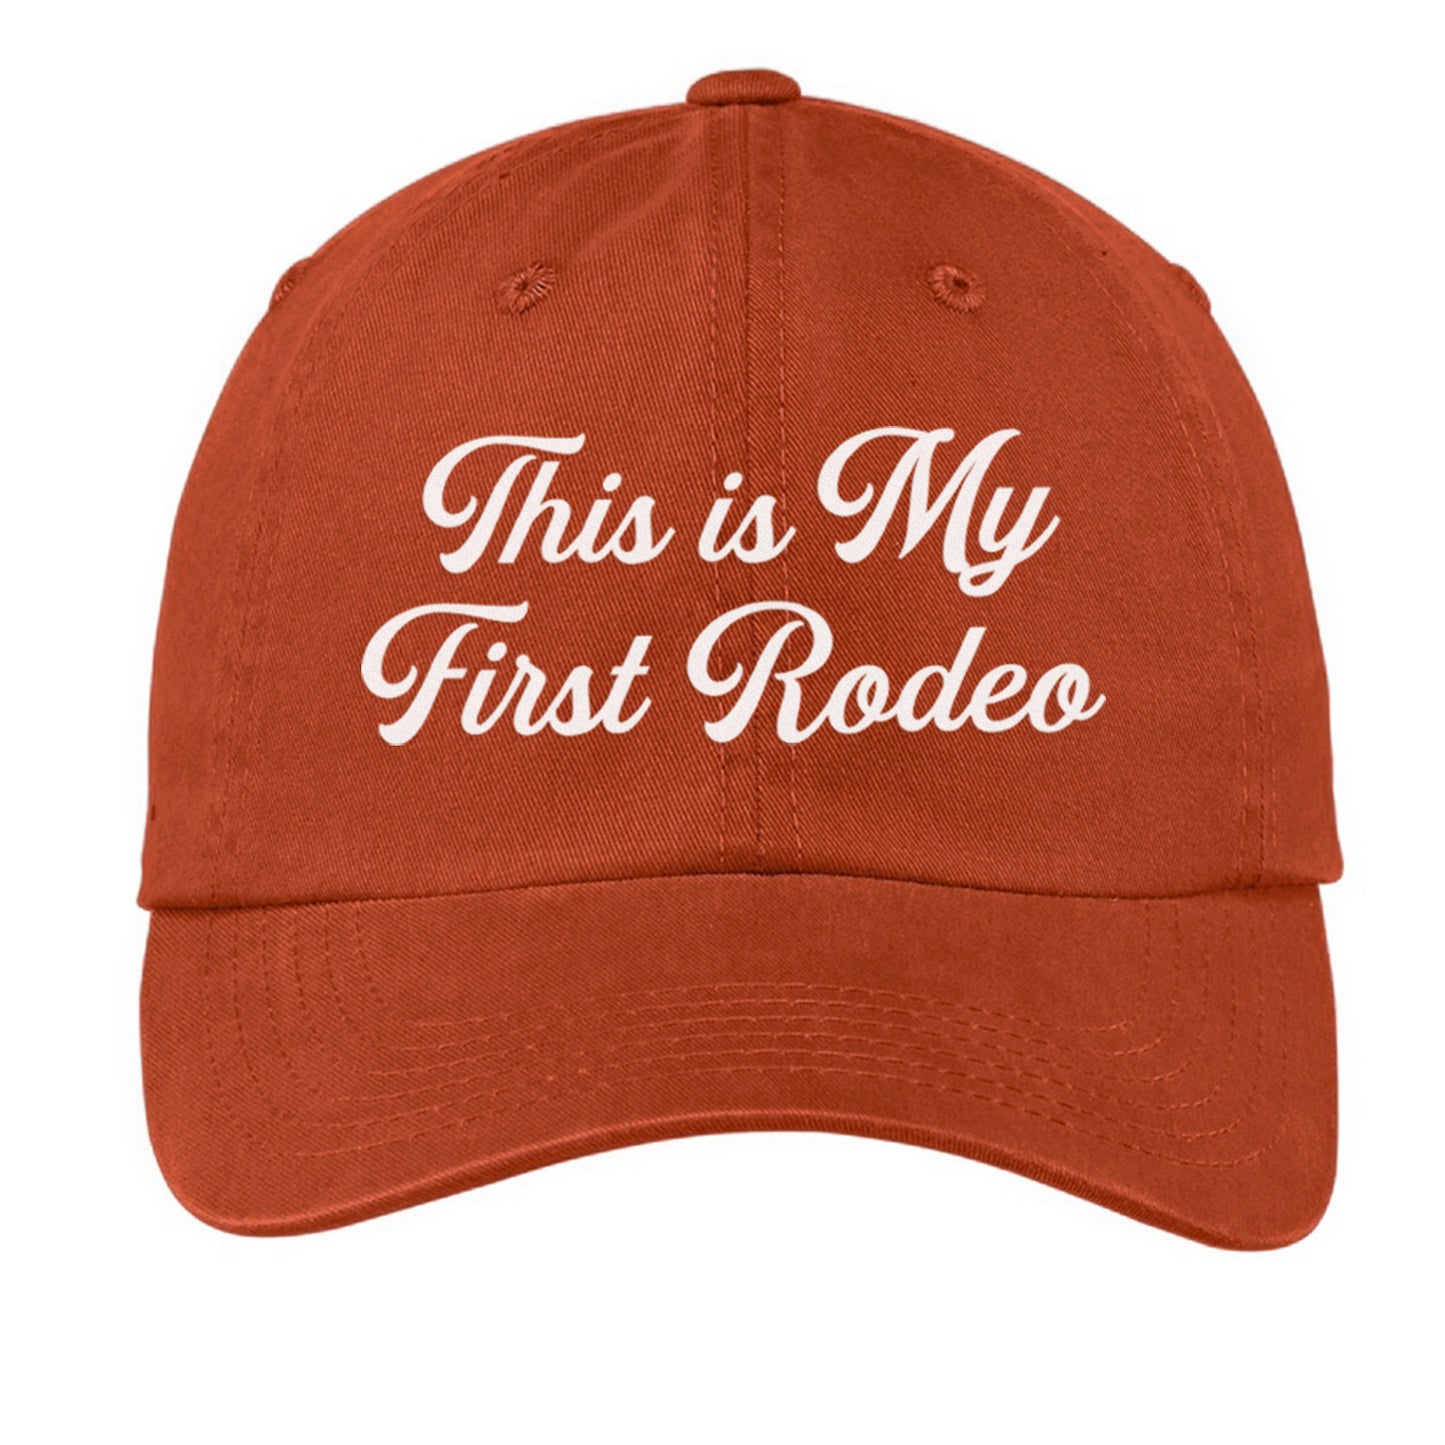 This is My First Rodeo Baseball Cap